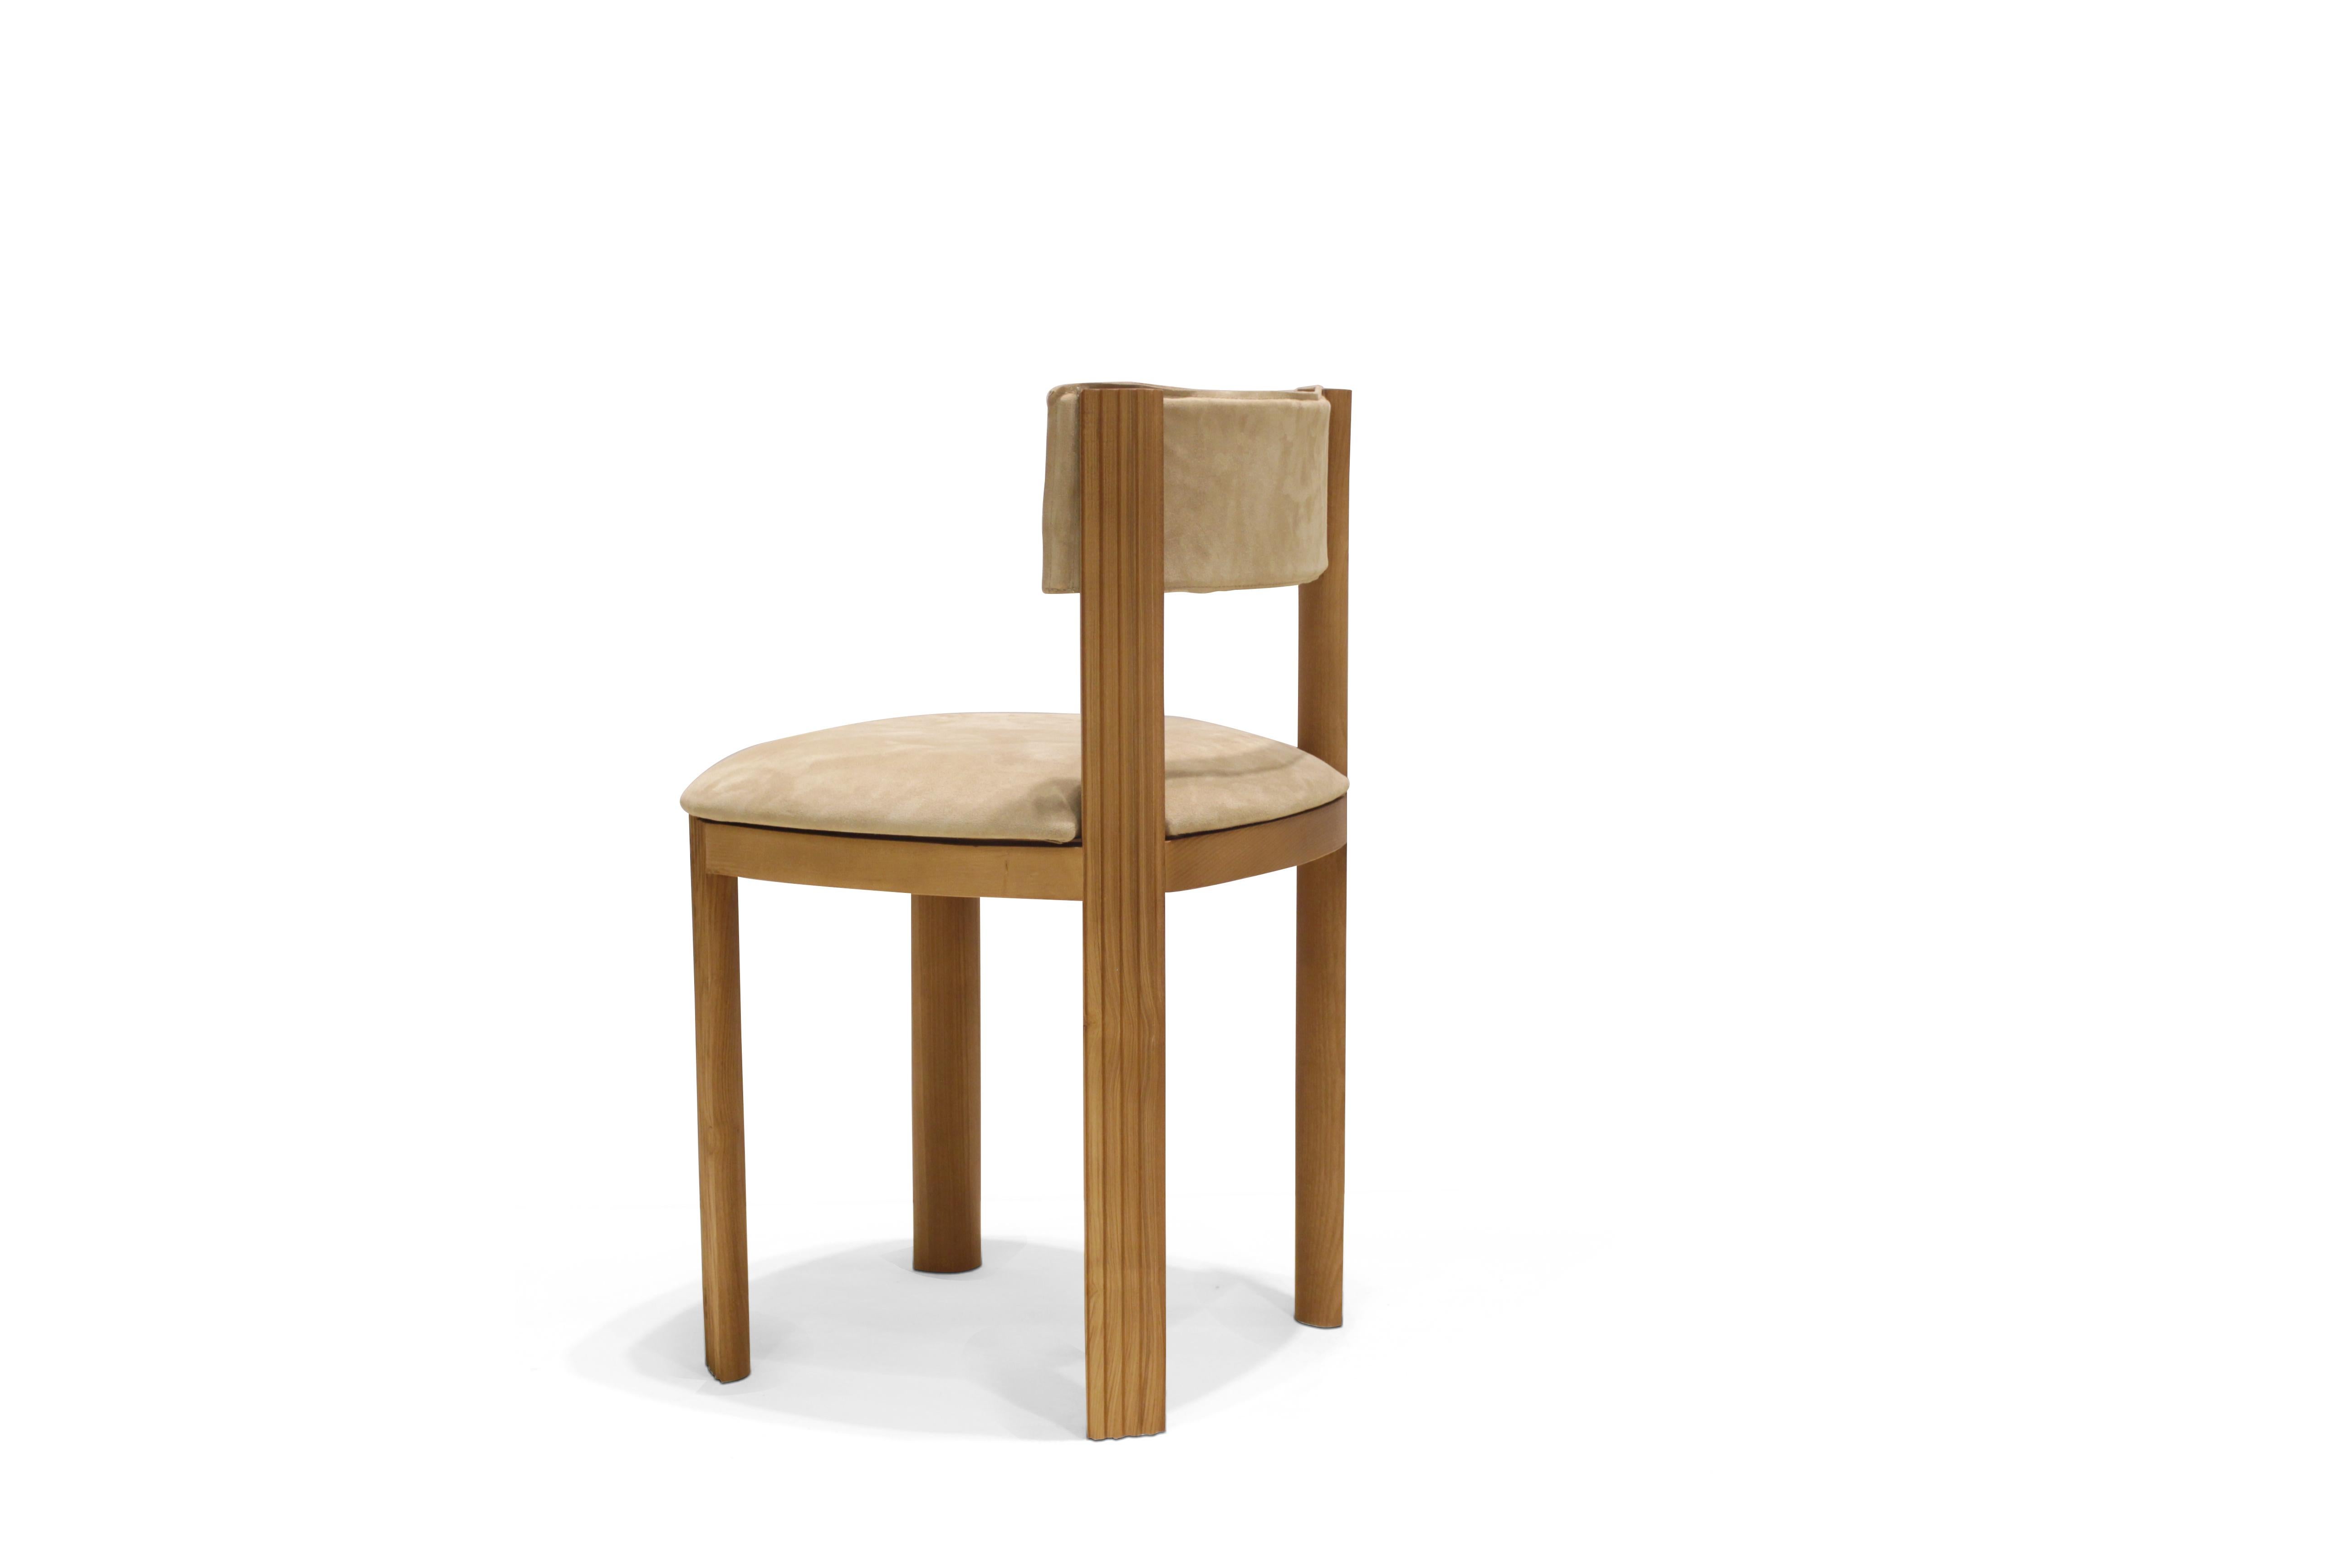 Set of 2 111 dining chair by Collector
Materials: upholstered in genuine velve siege linen.
Solid oak feet
Dimensions: W 45 x D 50 x H 77 cm SH 48 cm

111 represents all the lines incesed in the surface of the solid wood.

The Collector brand